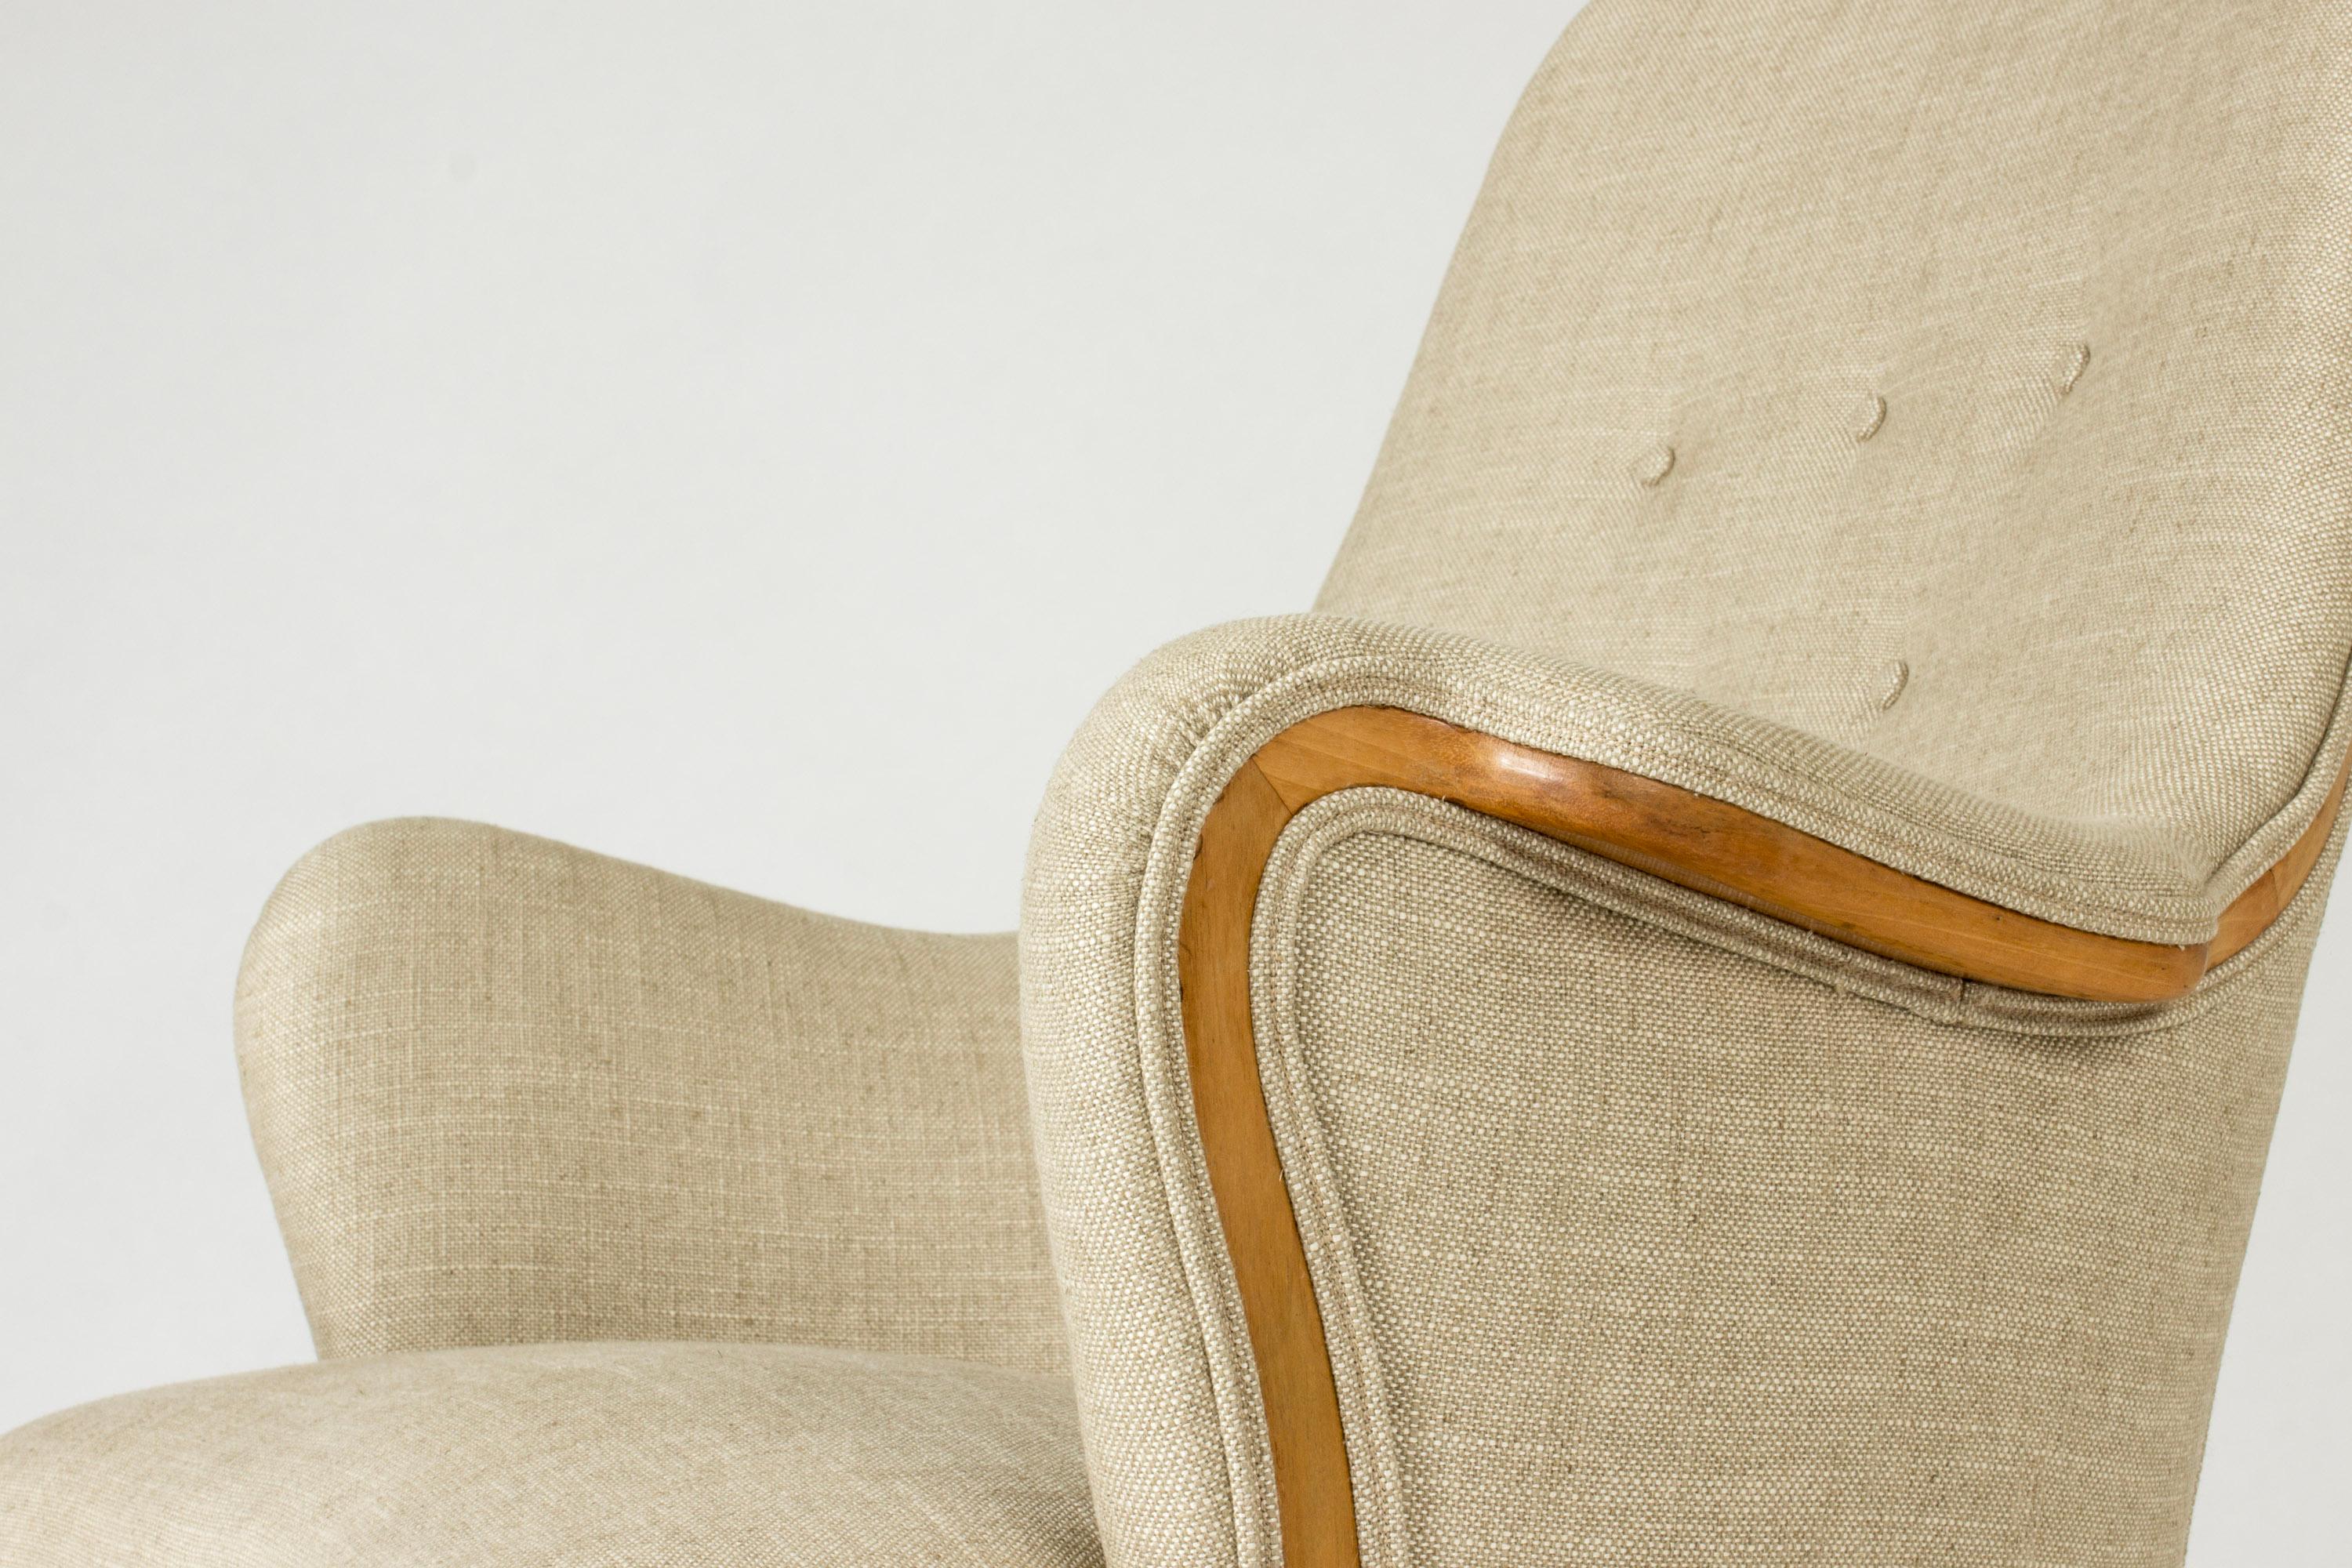 Linen Scandinavian Modernist Lounge Chair by Carl-Axel Acking, Sweden, 1950s For Sale